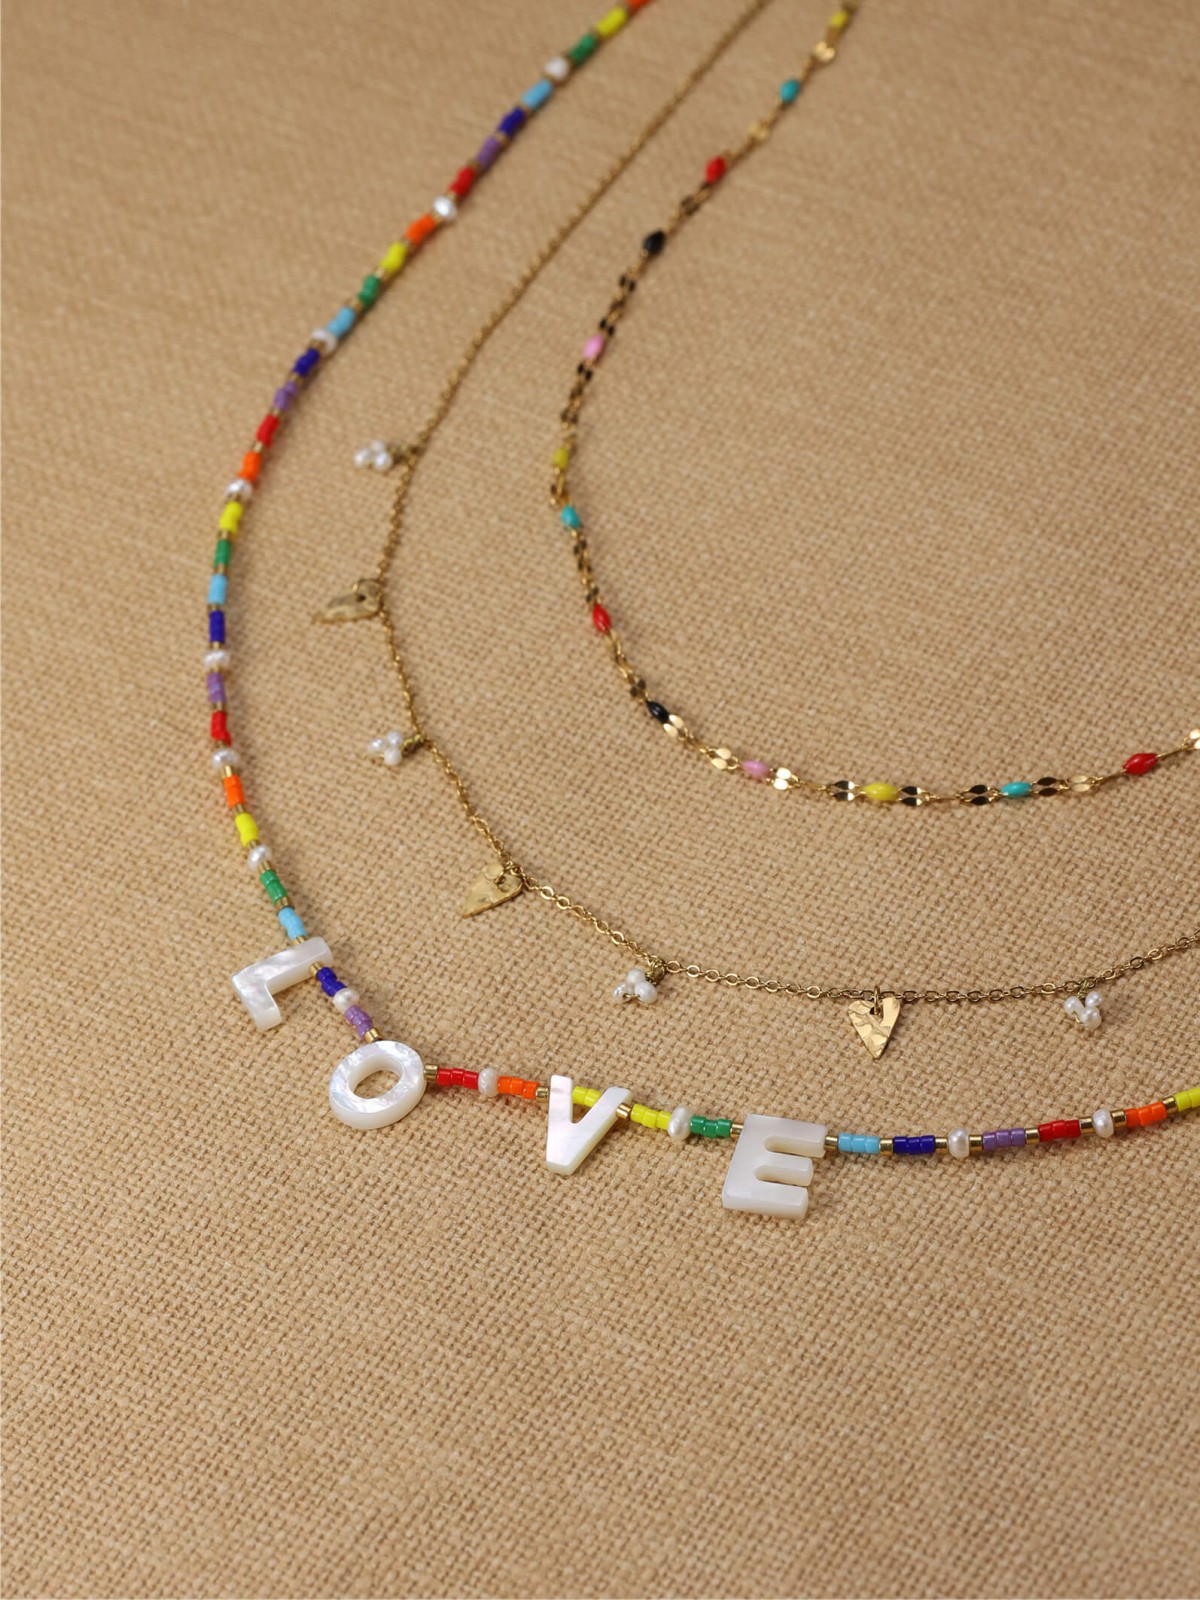 "Love" Necklace